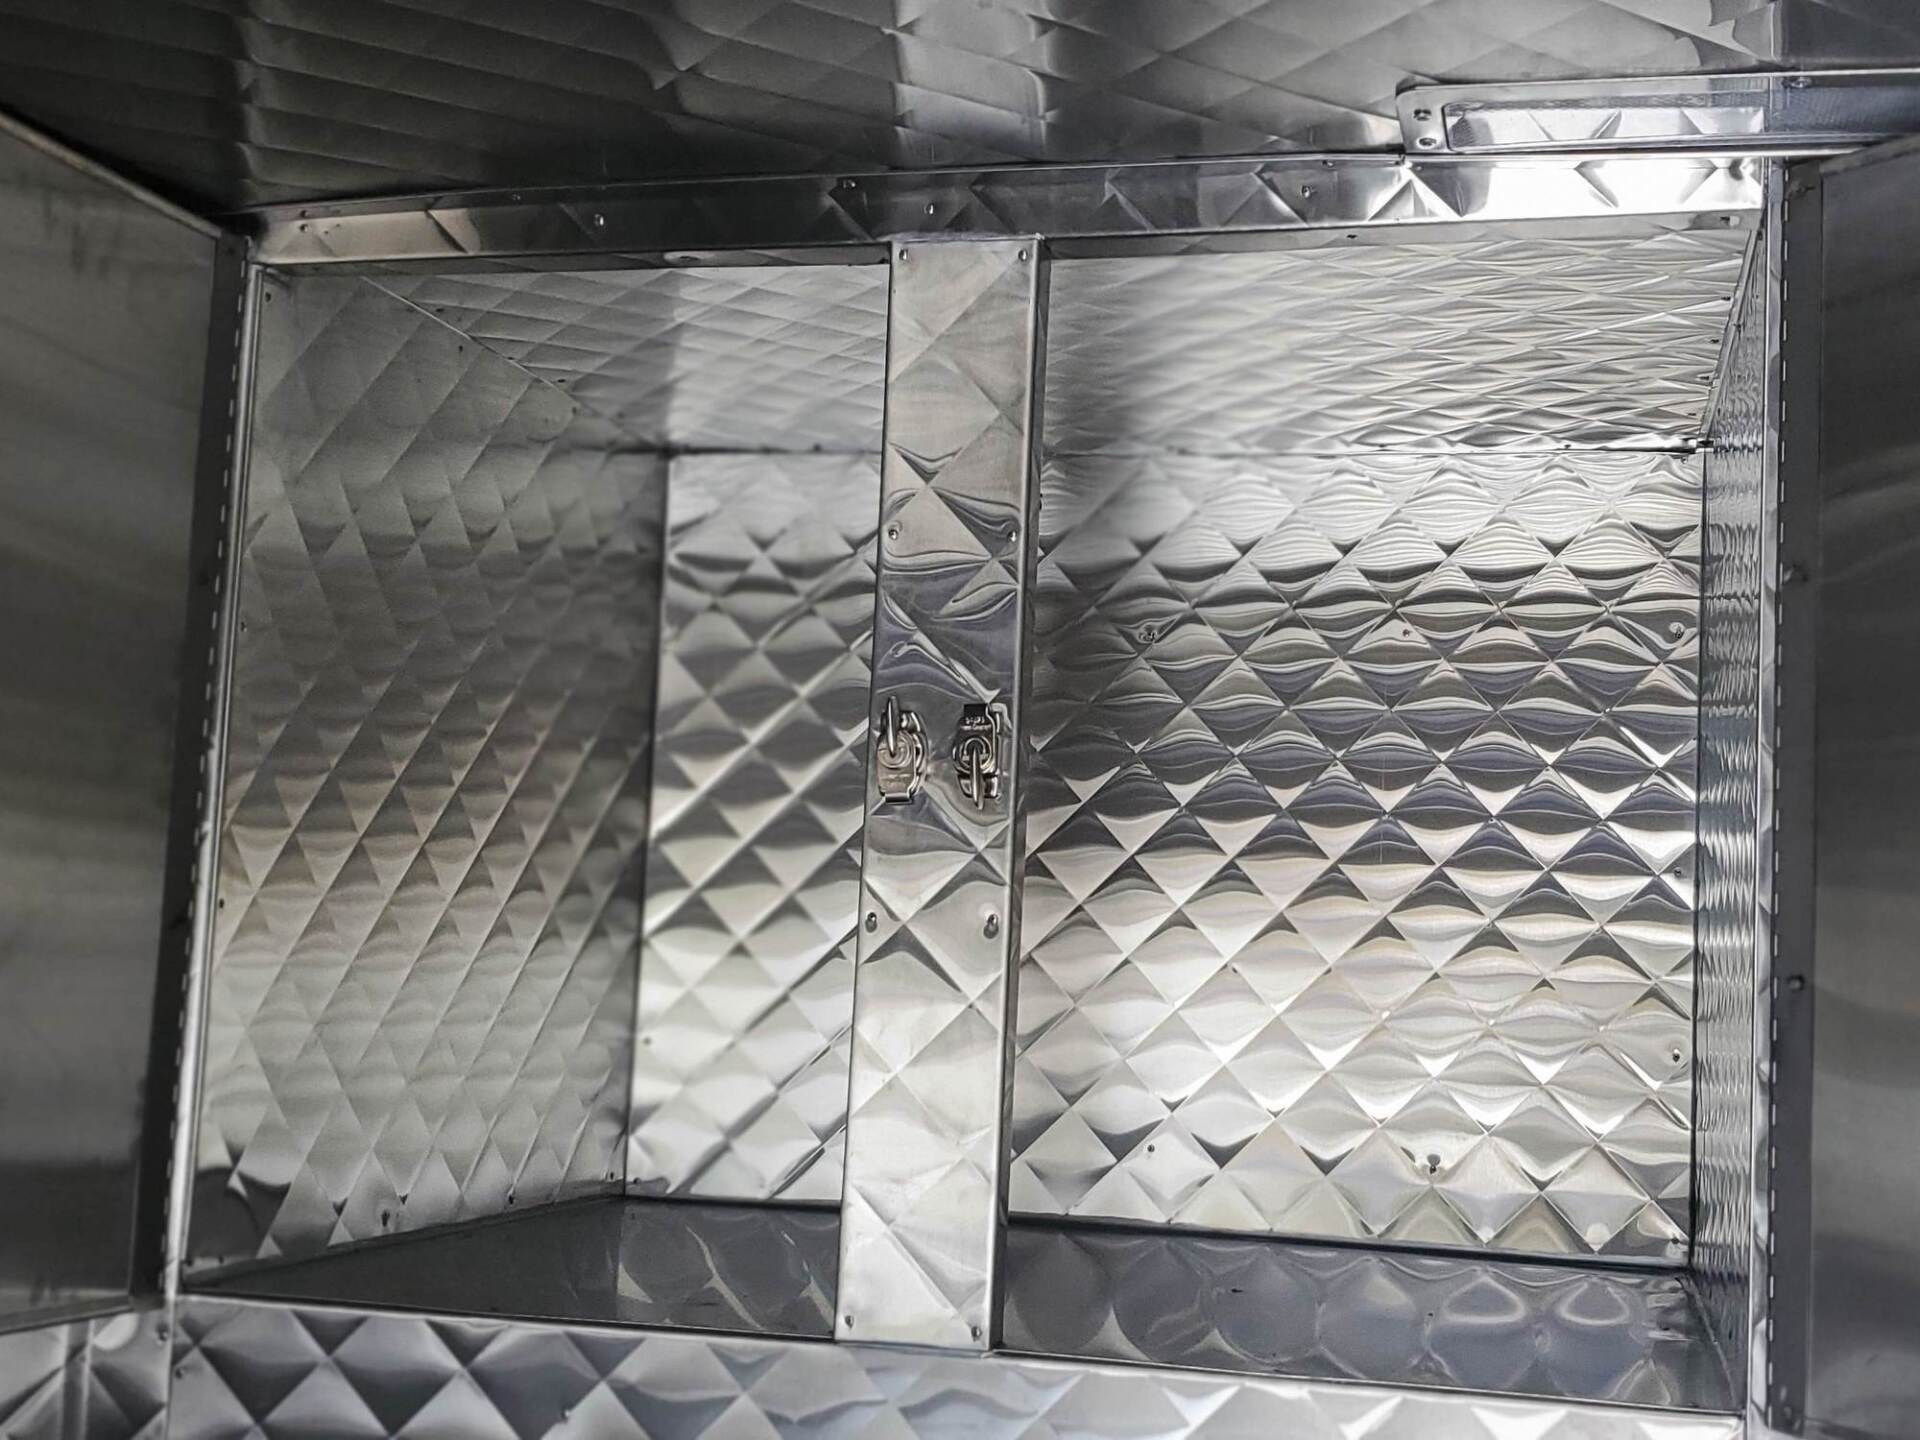 A stainless steel cabinet with a diamond pattern on it